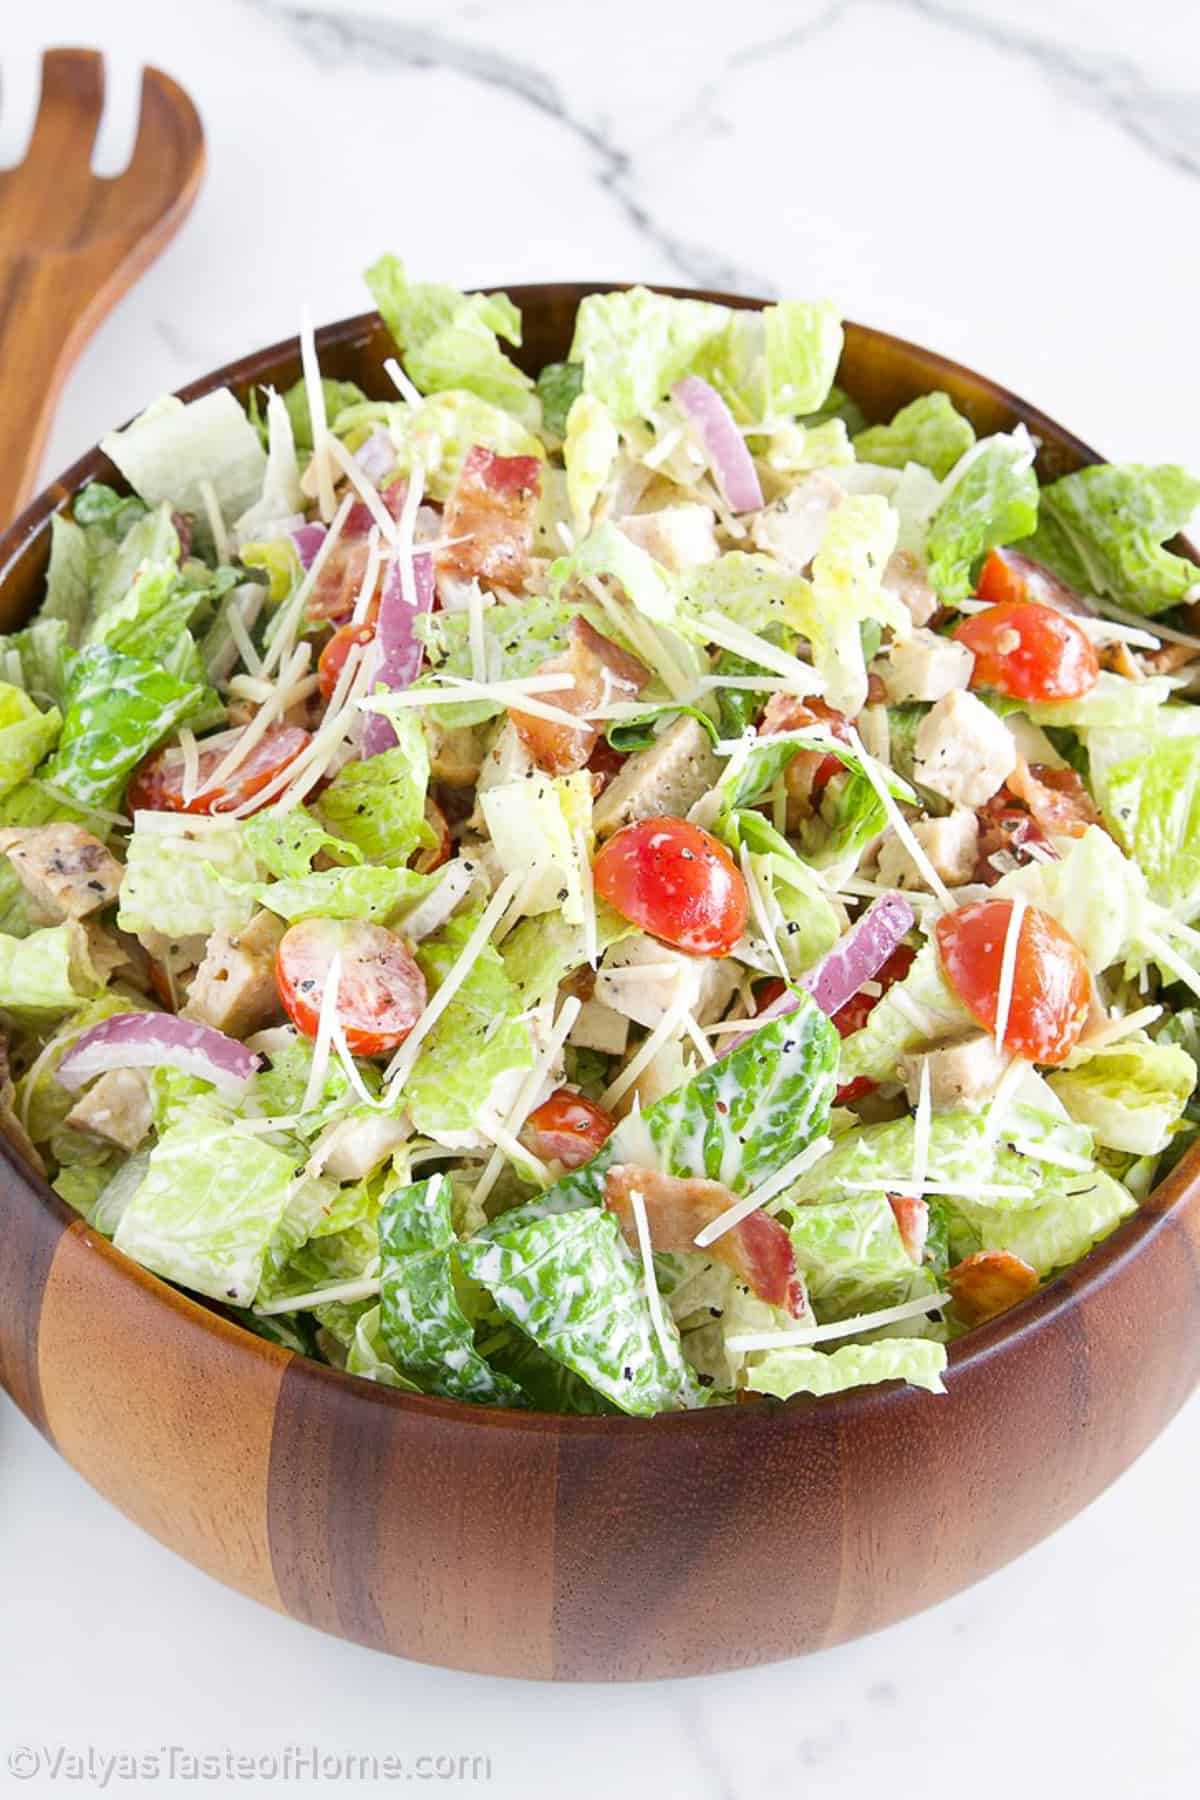 Caesar Salad is a classic salad dish that's commonly made with ingredients such as romaine lettuce, croutons, grated cheese, with a creamy Caesar Salad Dressing that adds all the flavor! 